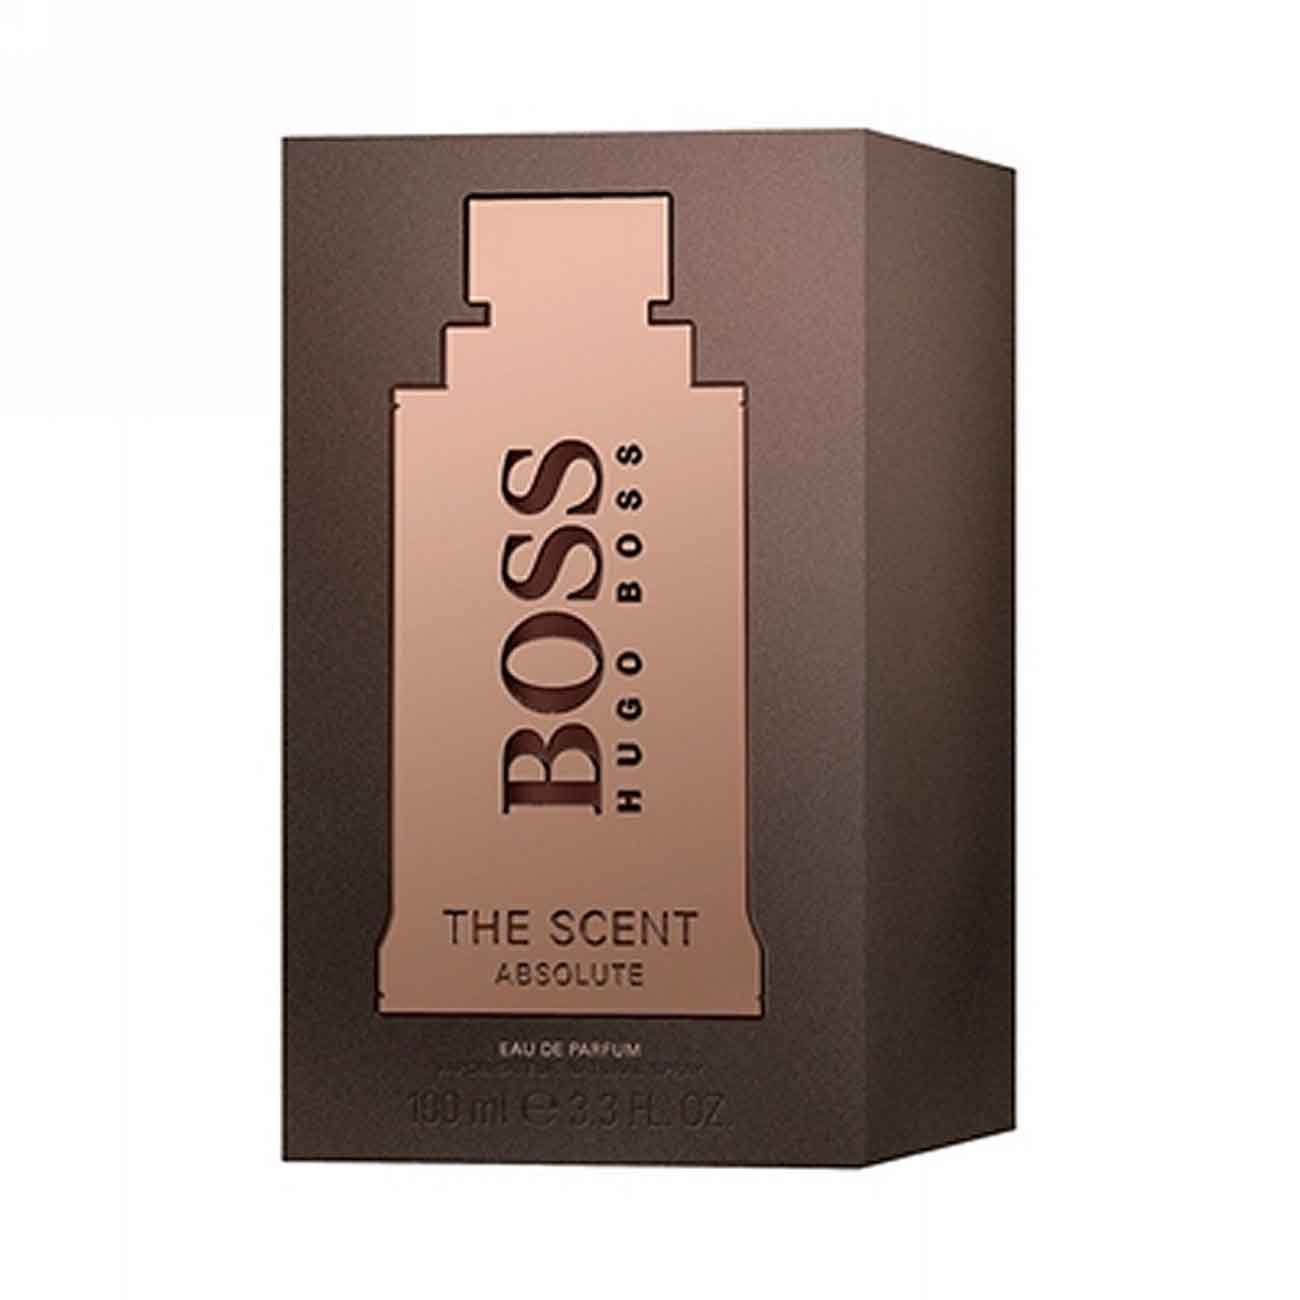 Fragancia para Hombre Boss The Scent Absolute 100 Ml